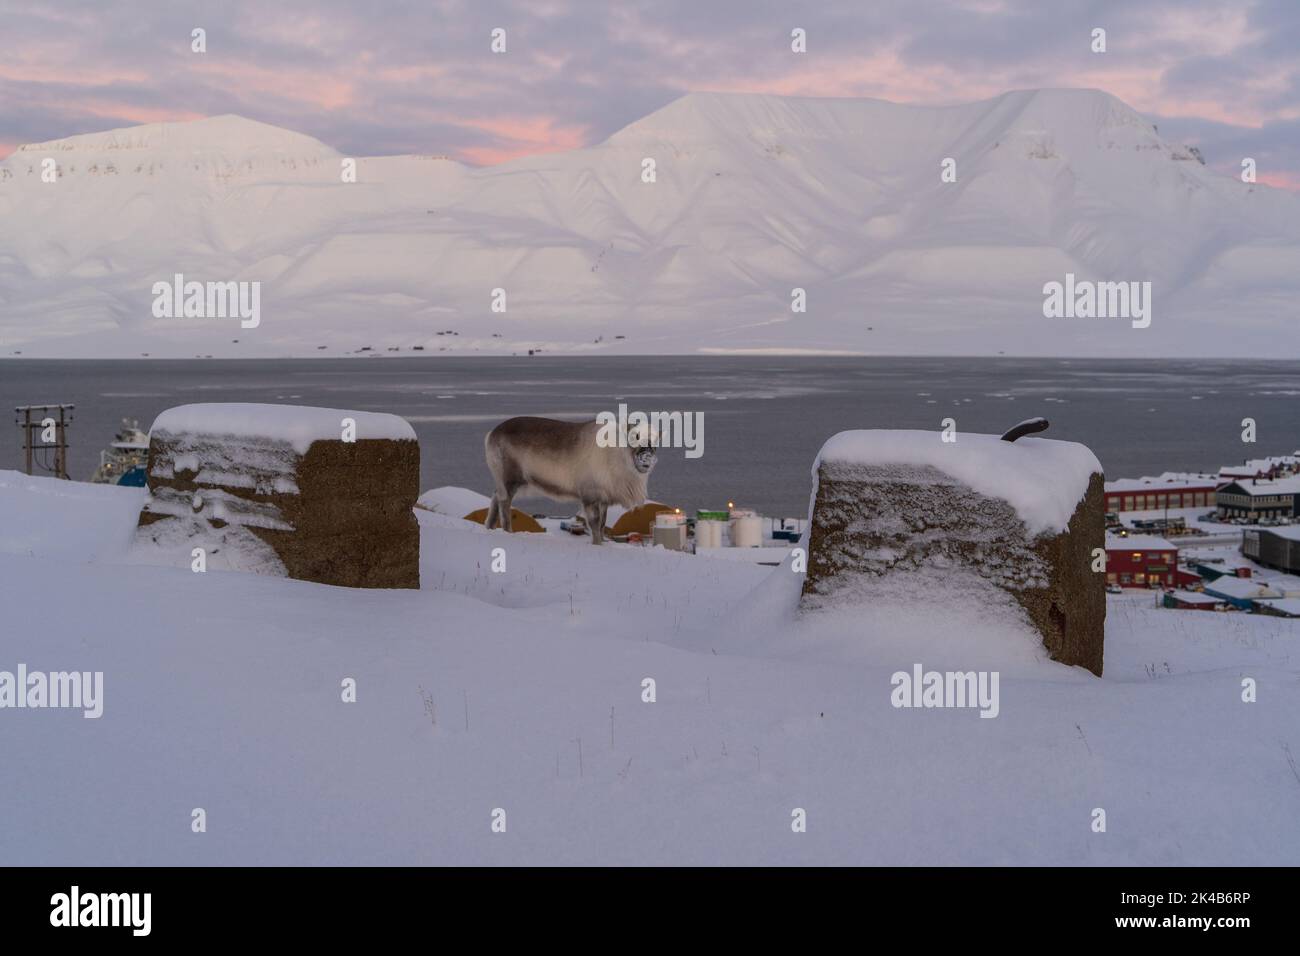 Reindeer walking above the town in snow landscape at dusk in Longyearbyen, Svalbard Stock Photo